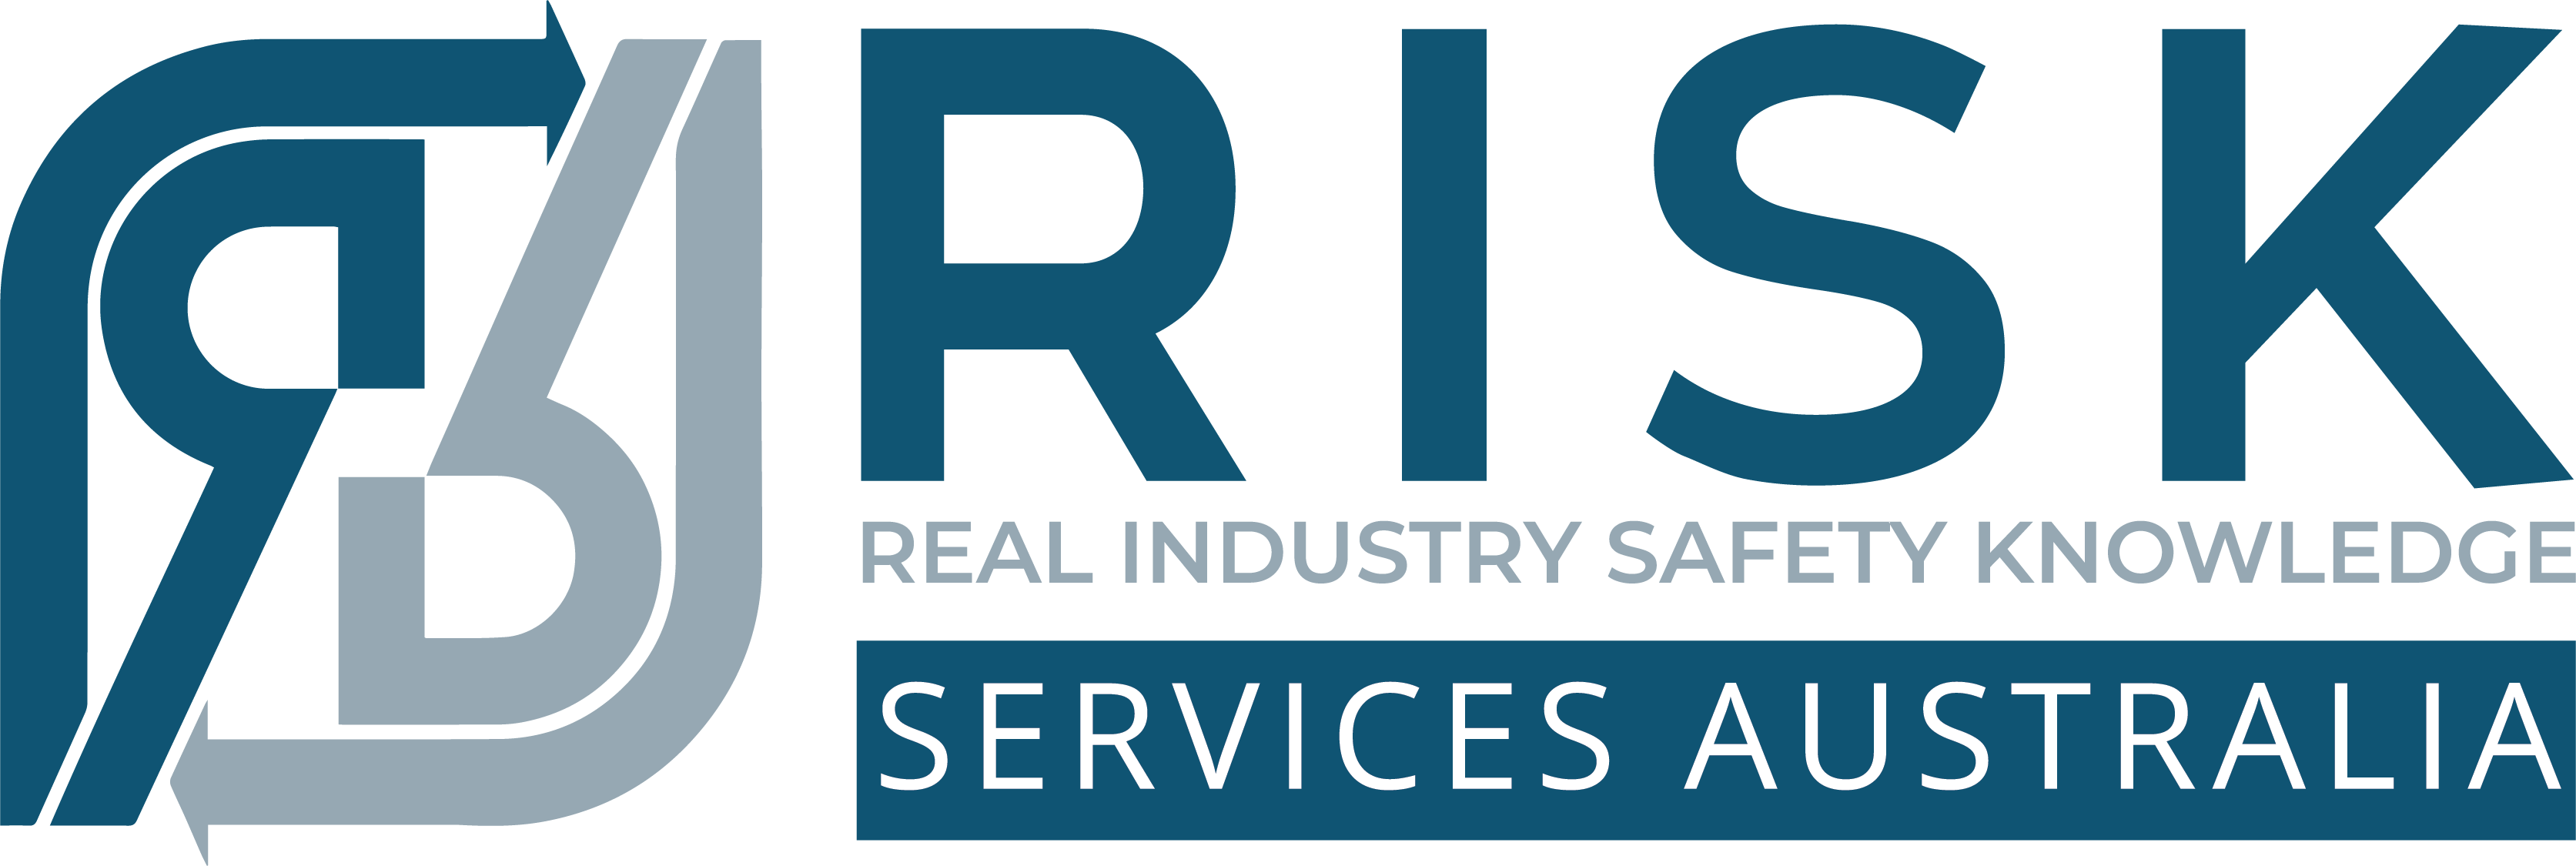 Risk Services